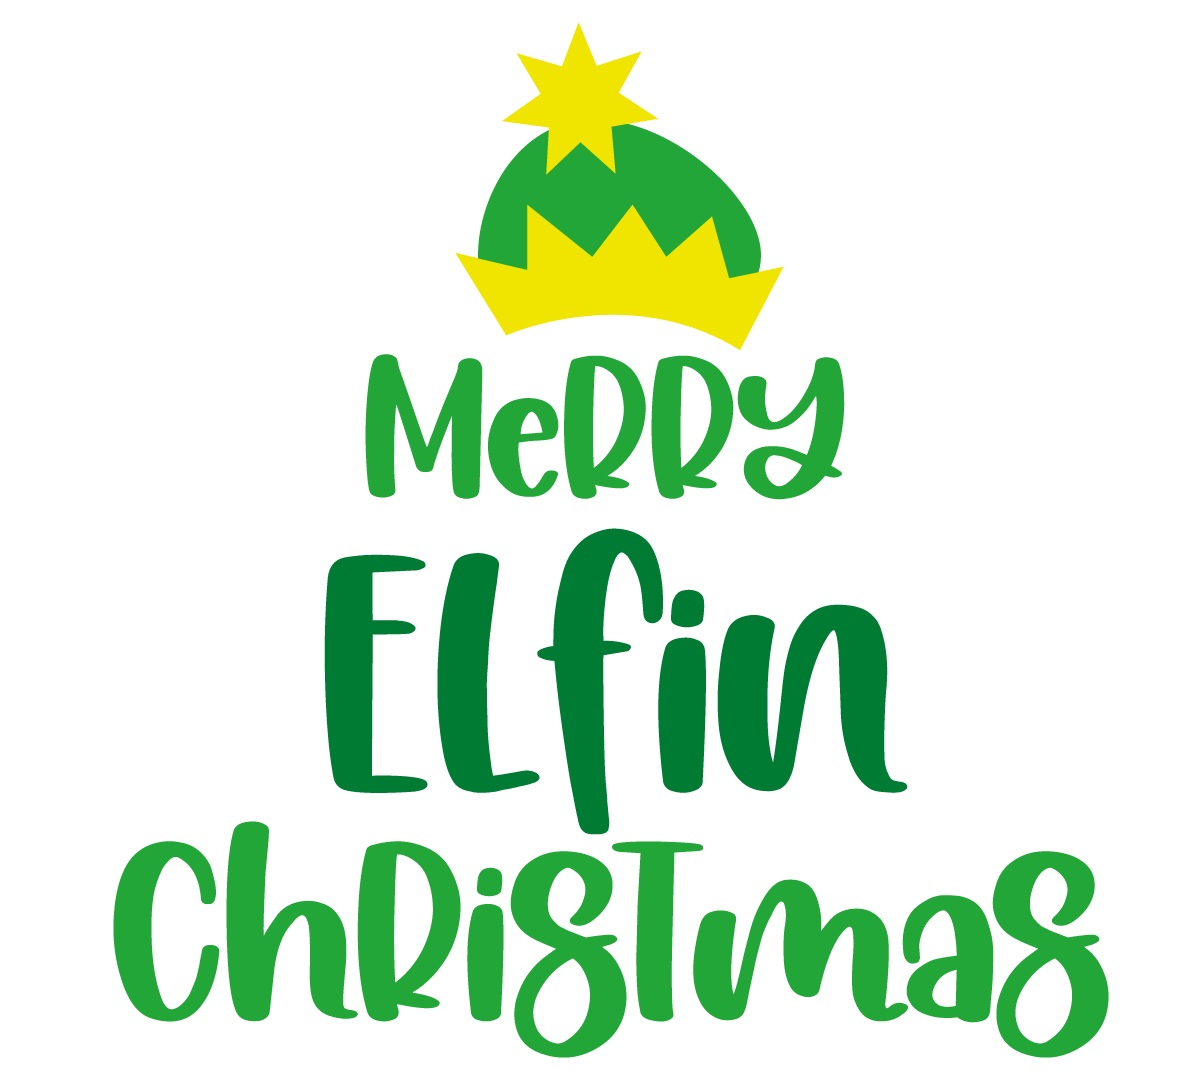 Get Microsoft Office For Less Than $9/App During The Merry Elfin’ Christmas Campaign